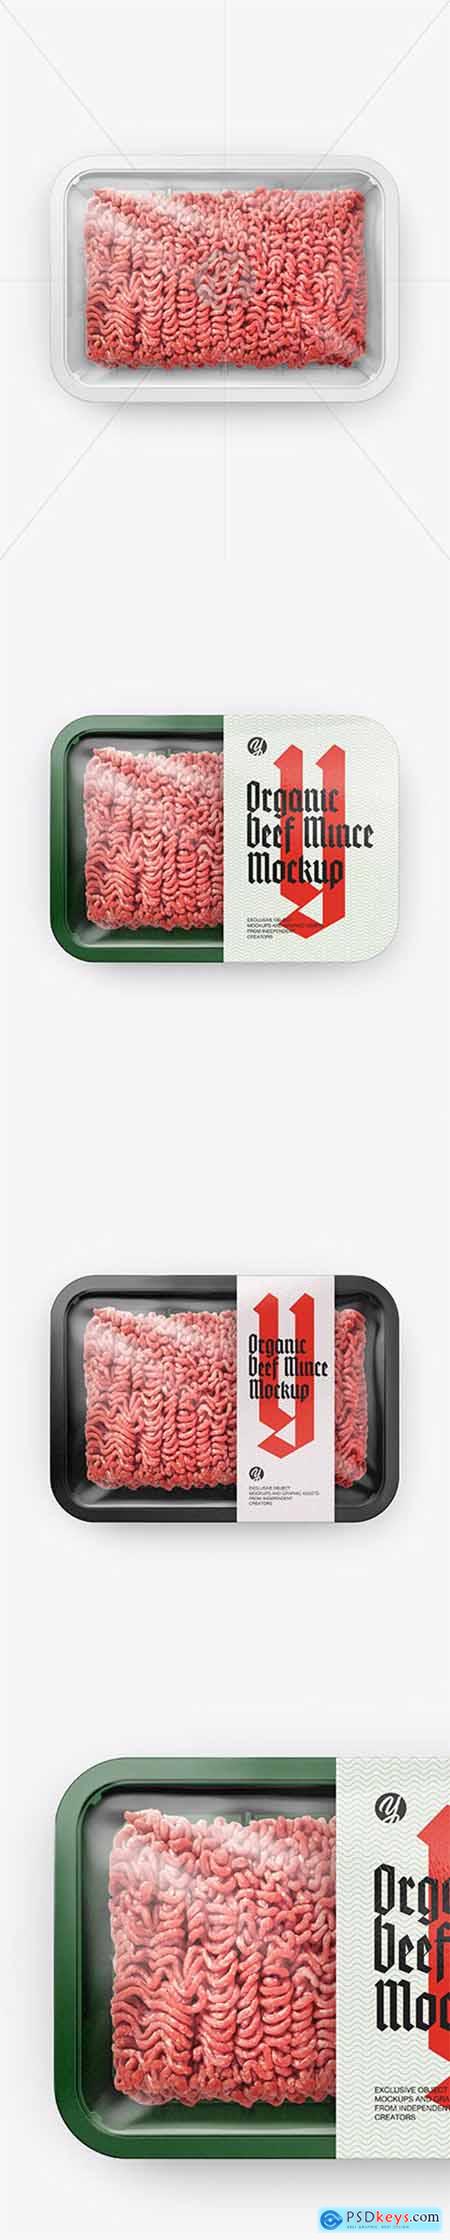 Download Plastic Tray With Beef Mince Mockup - Top View 29686 » Free Download Photoshop Vector Stock ...